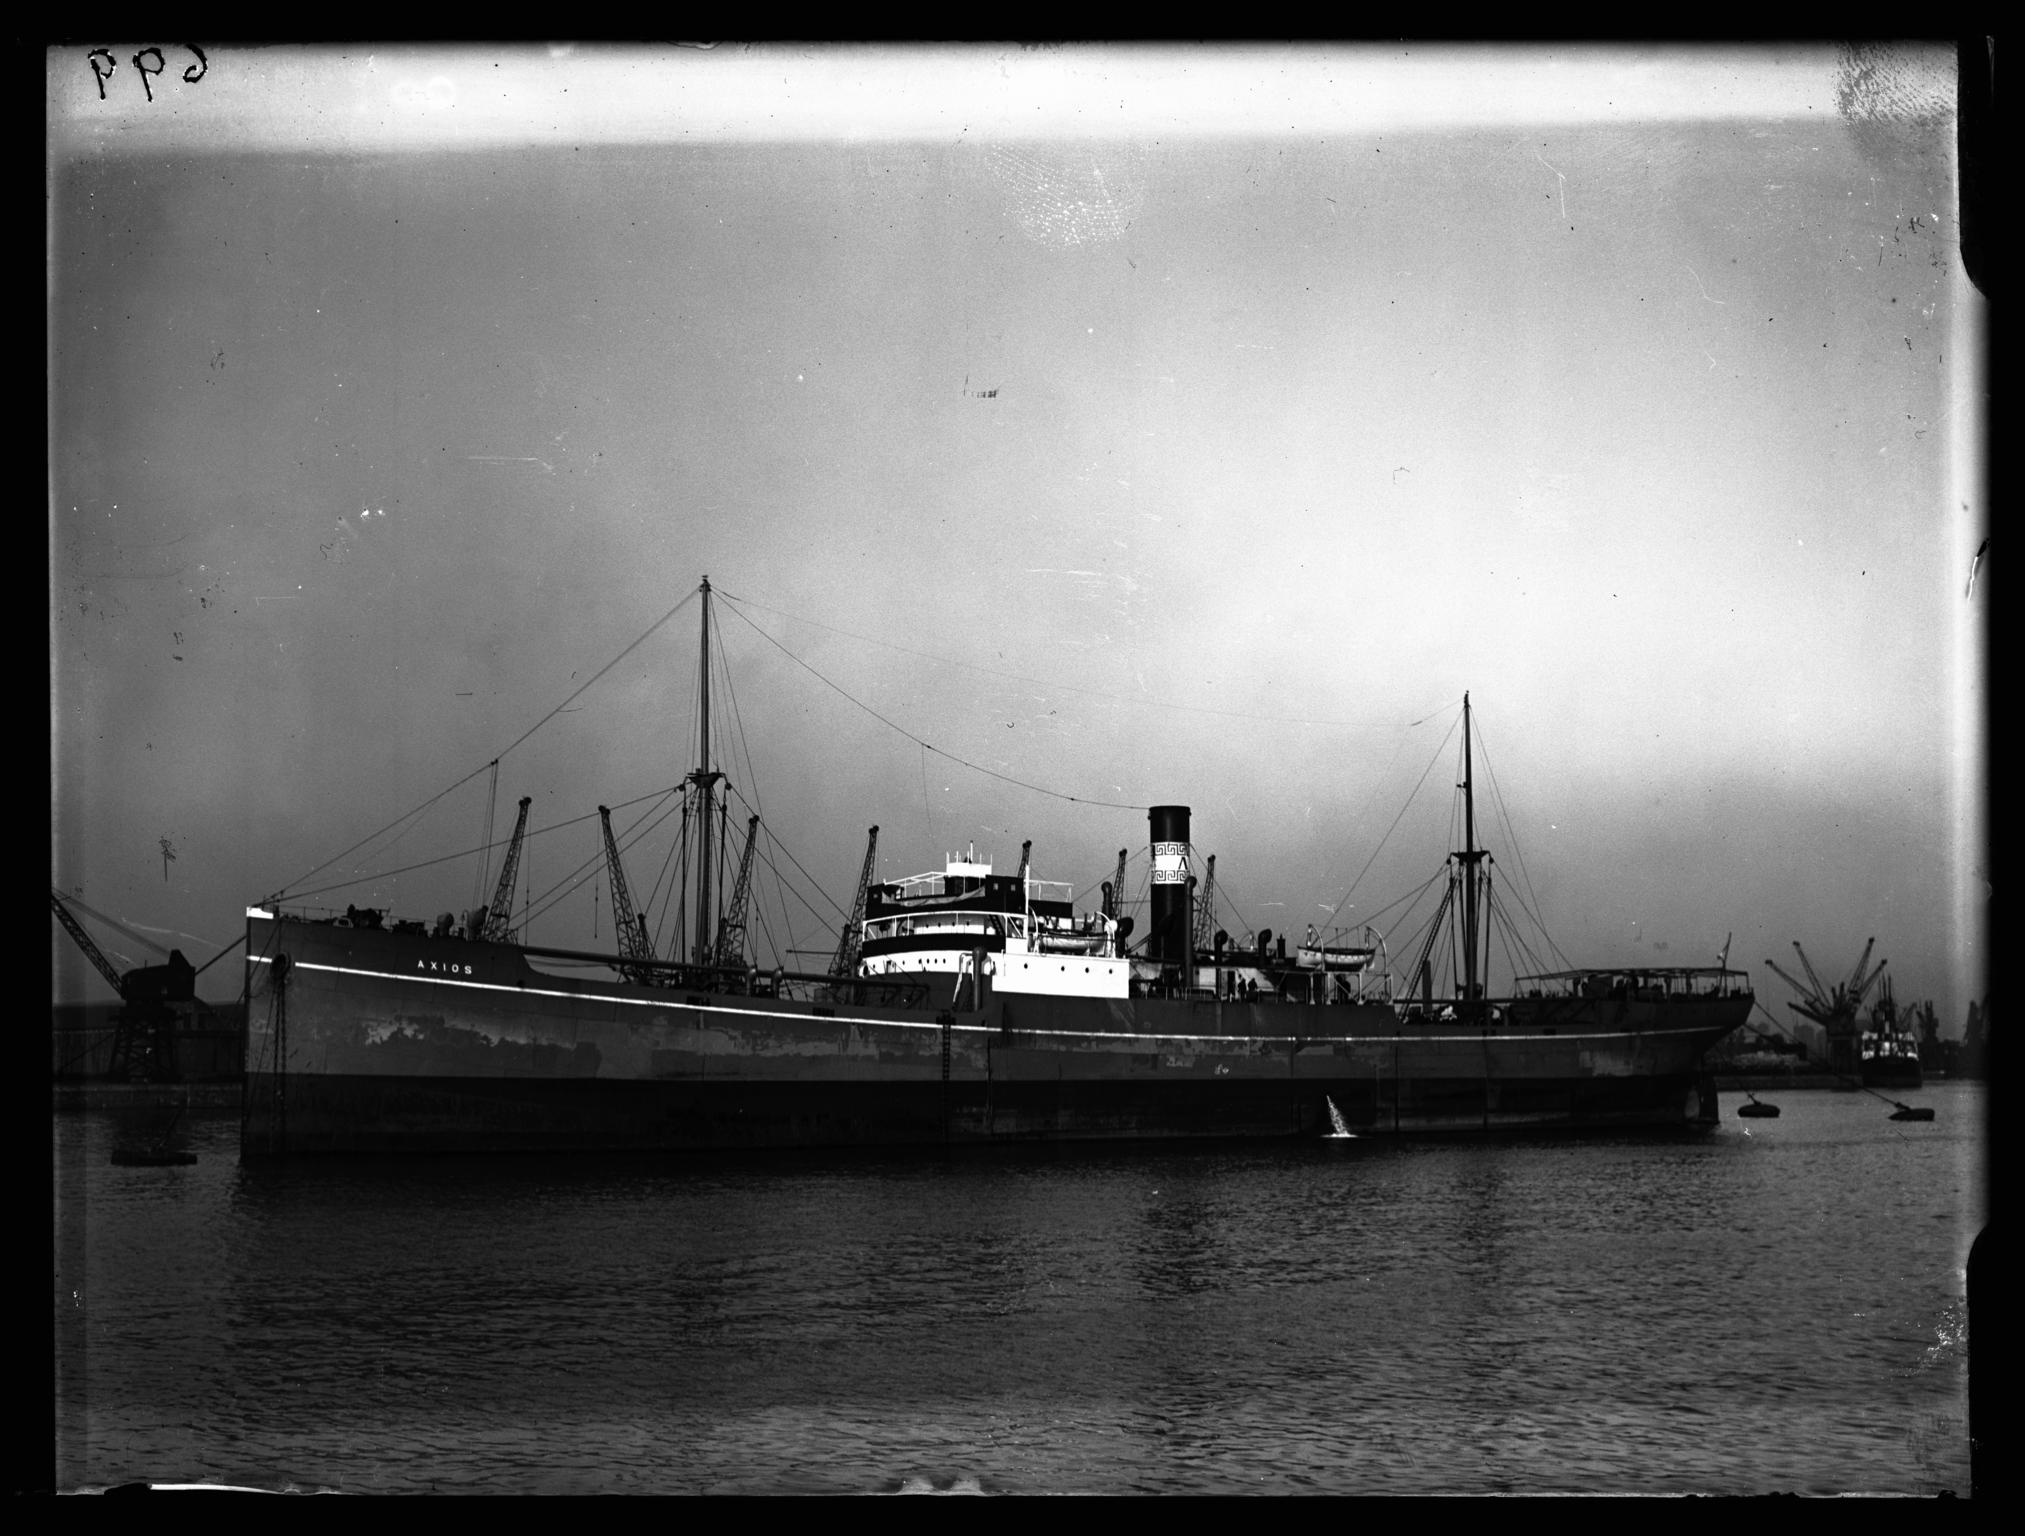 S.S. AXIOS, glass negative